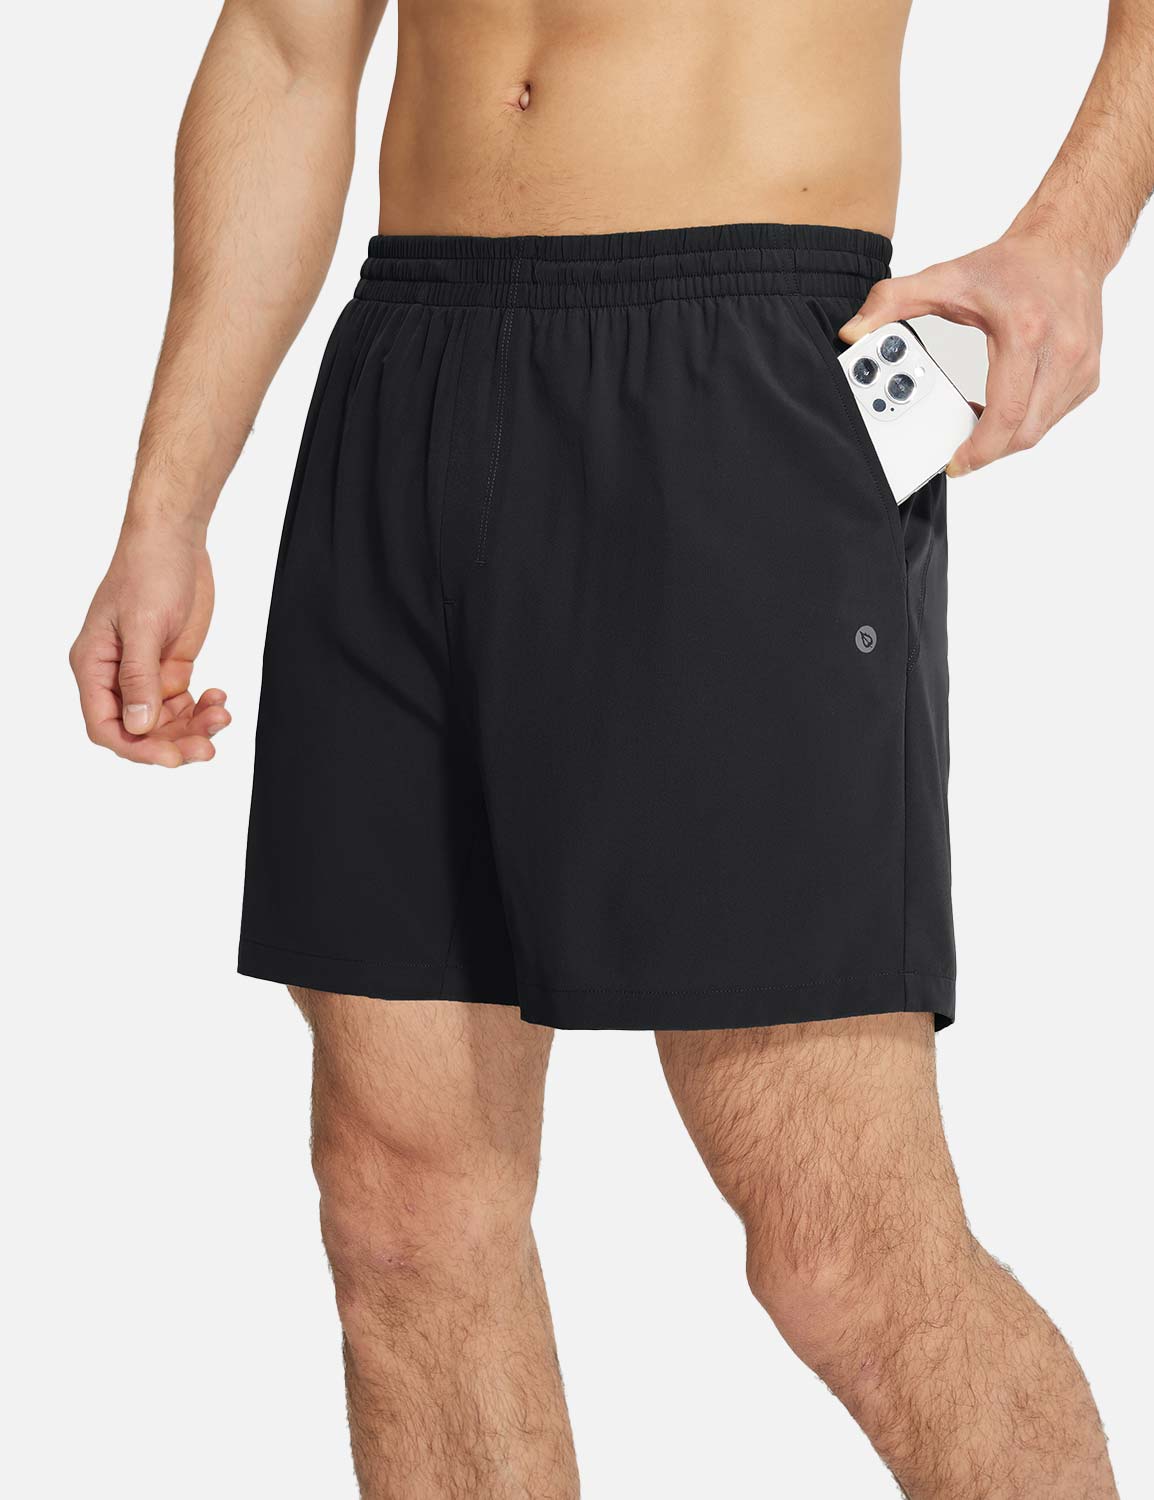 Baleaf Men's Lightweight Quick-dry Shorts Anthracite with Pockets